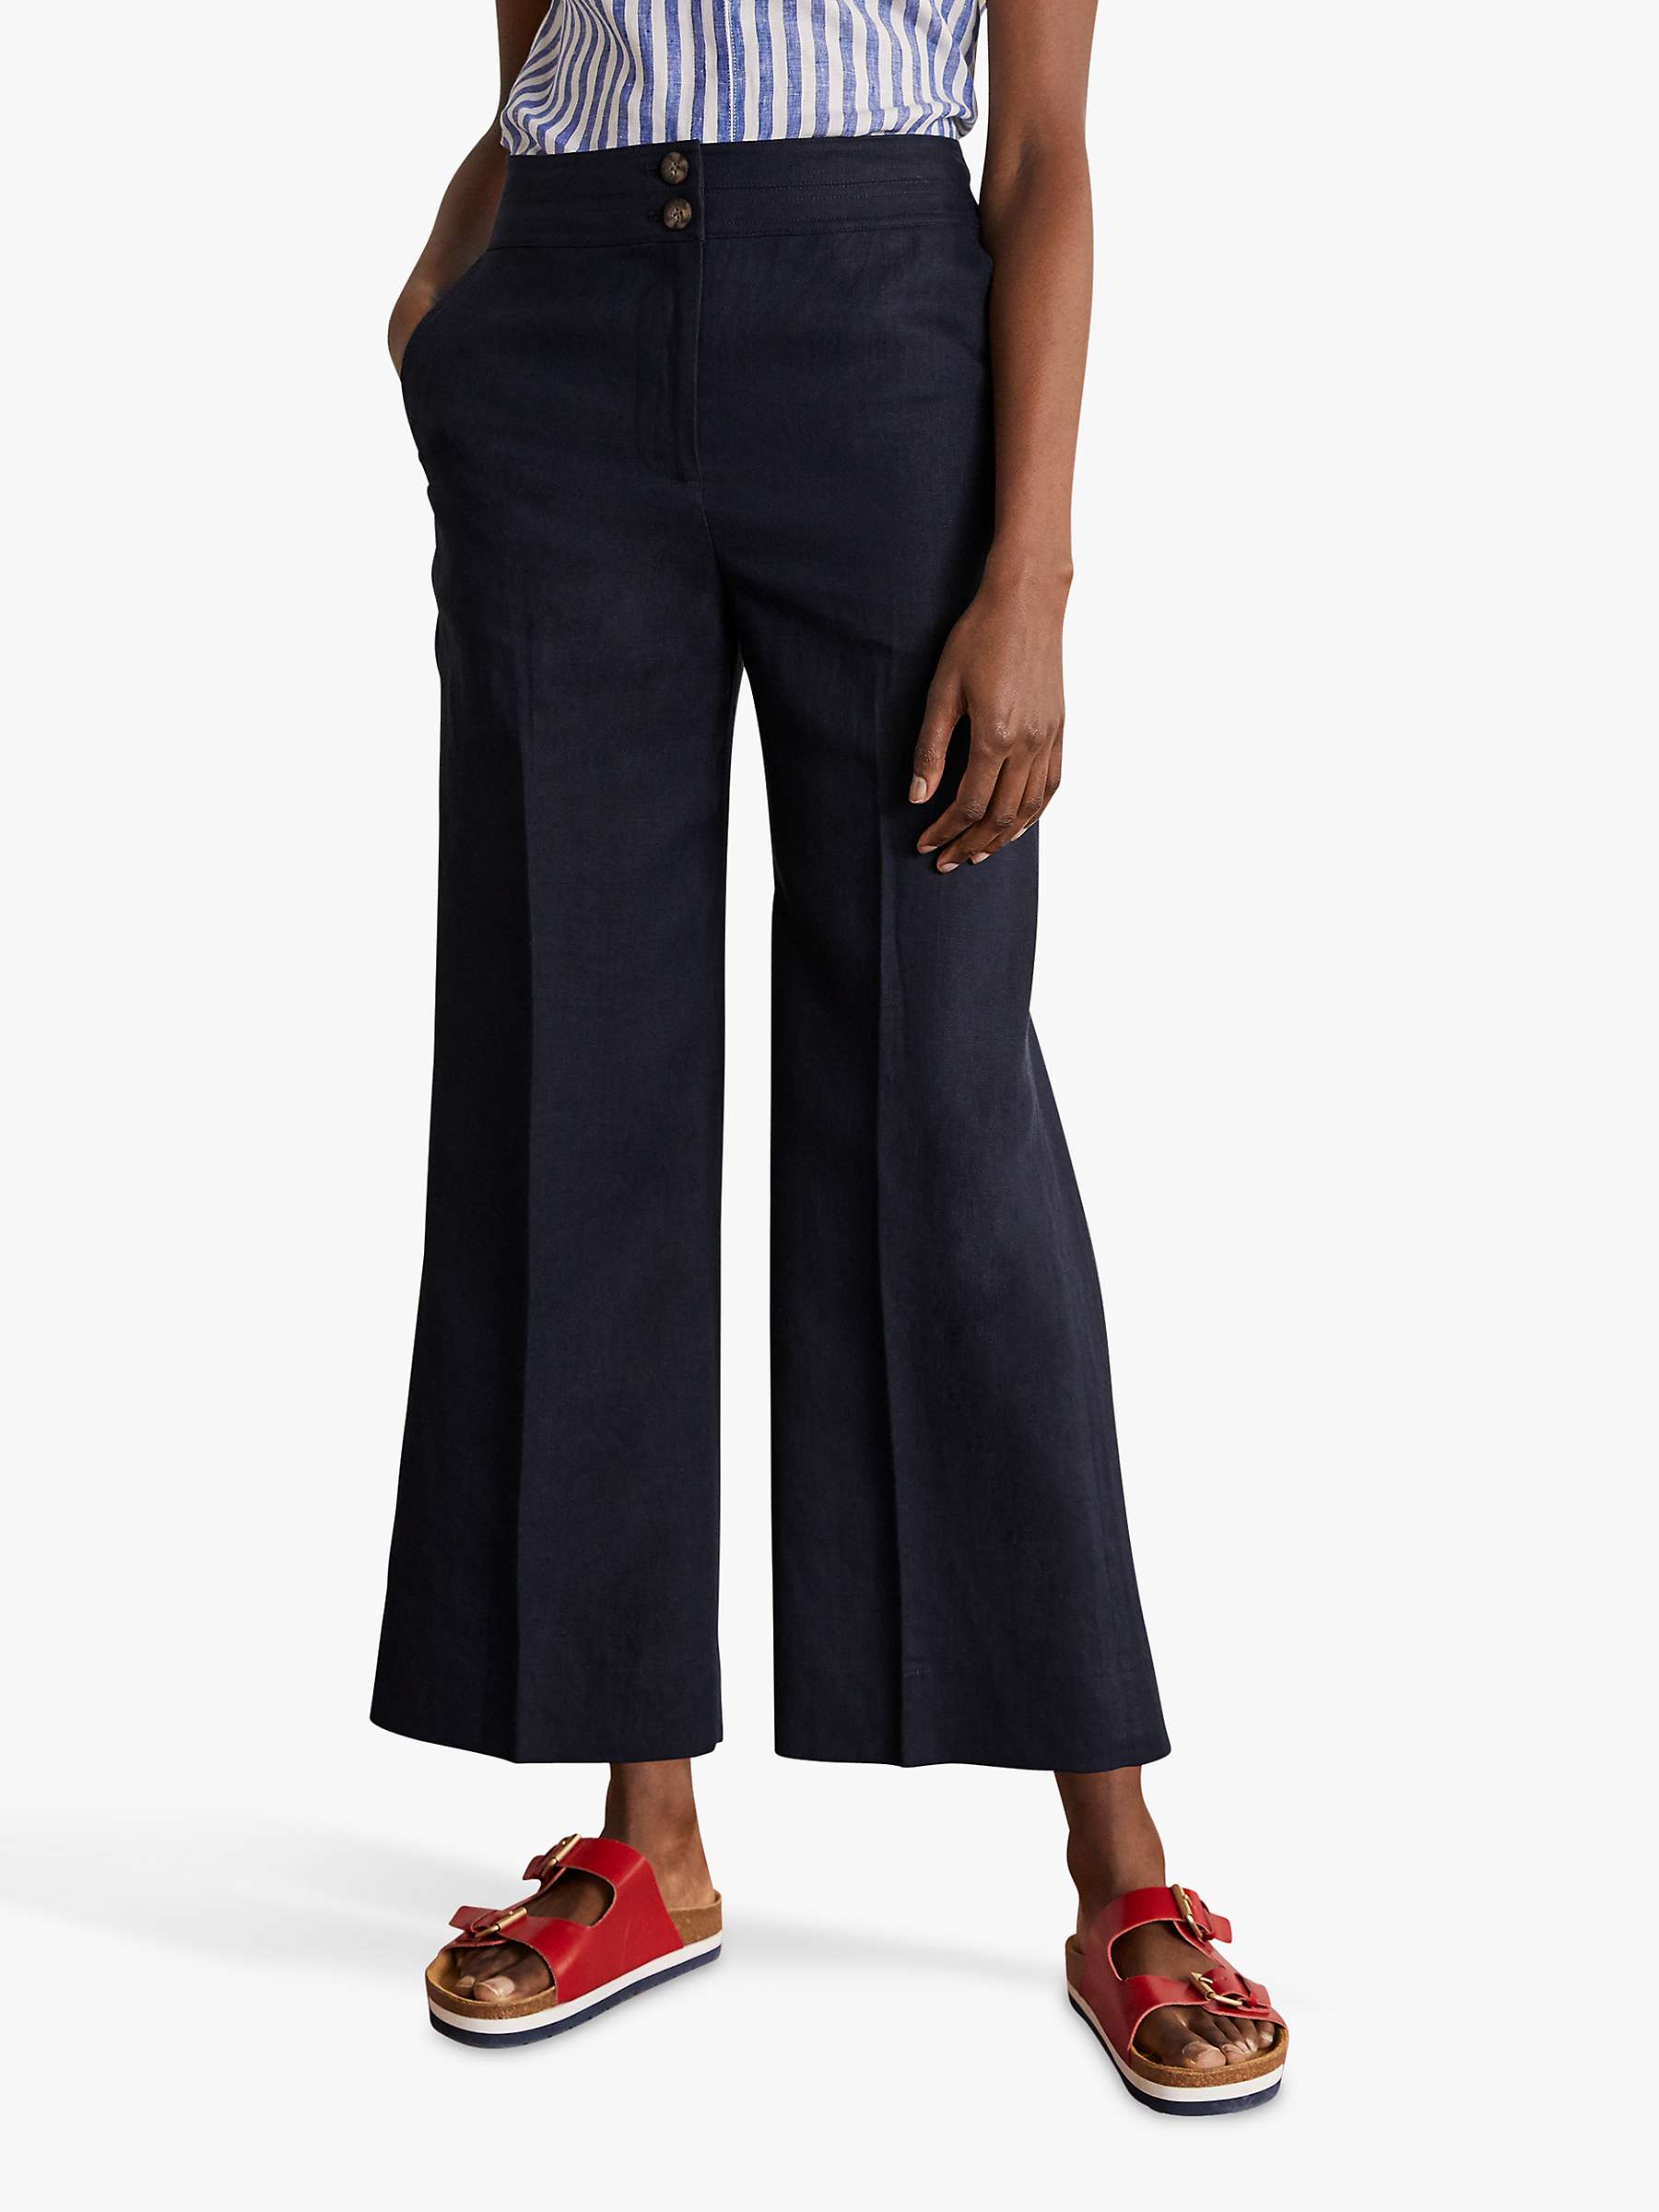 Boden Cornwall Linen Flared Trousers, Navy at John Lewis & Partners